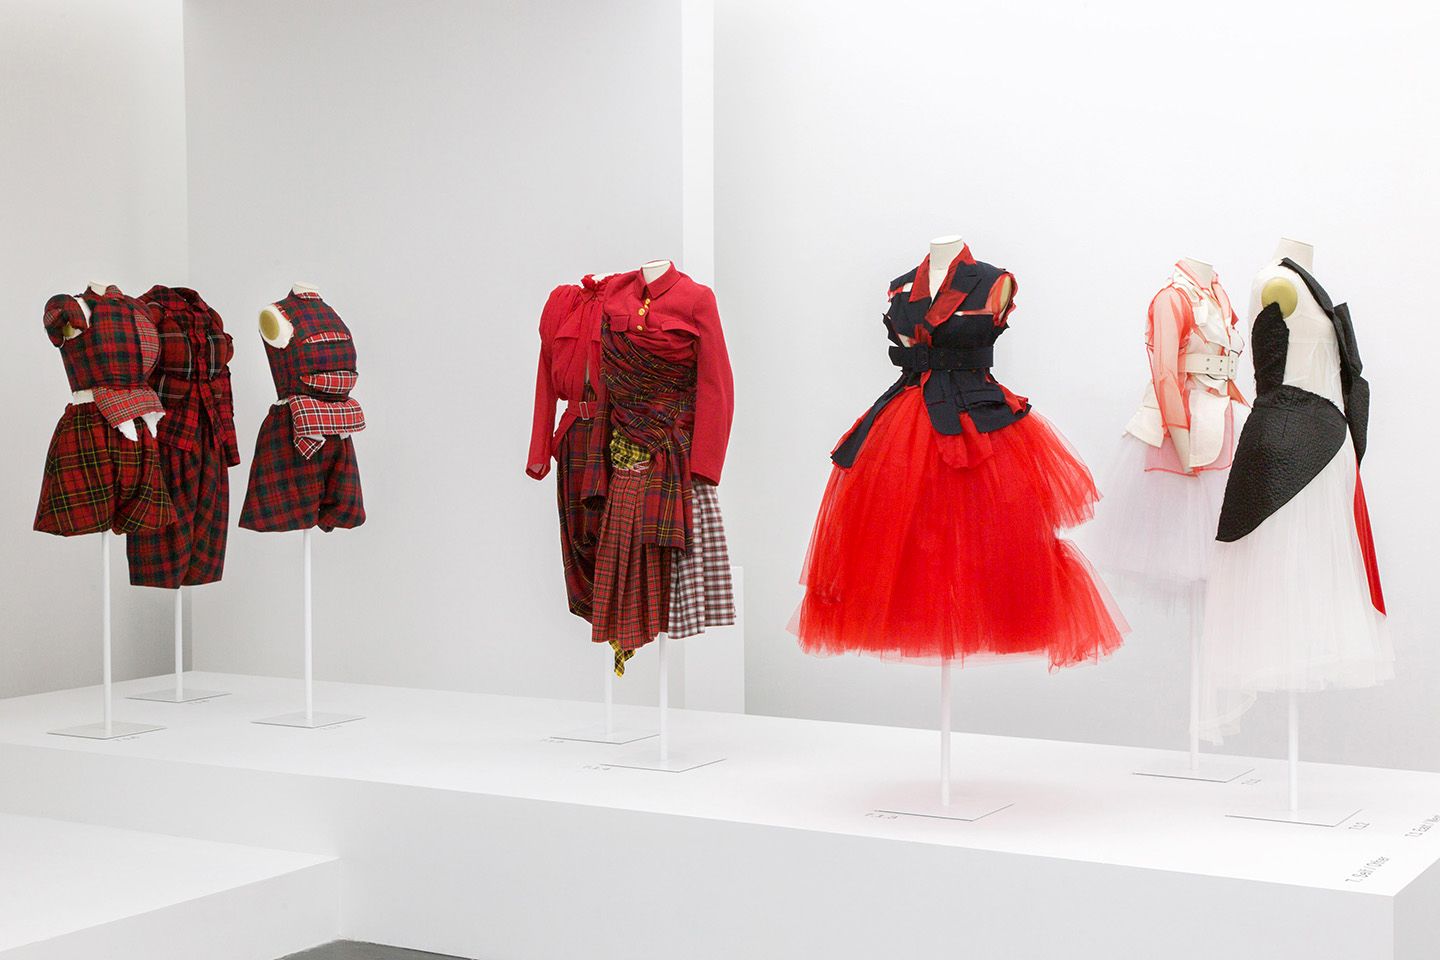 Rei Kawakubo, the founder of Comme des Garcons (2websites: Doverstreetmarket), designed an edgy and beautiful Comme des Garcons store in...